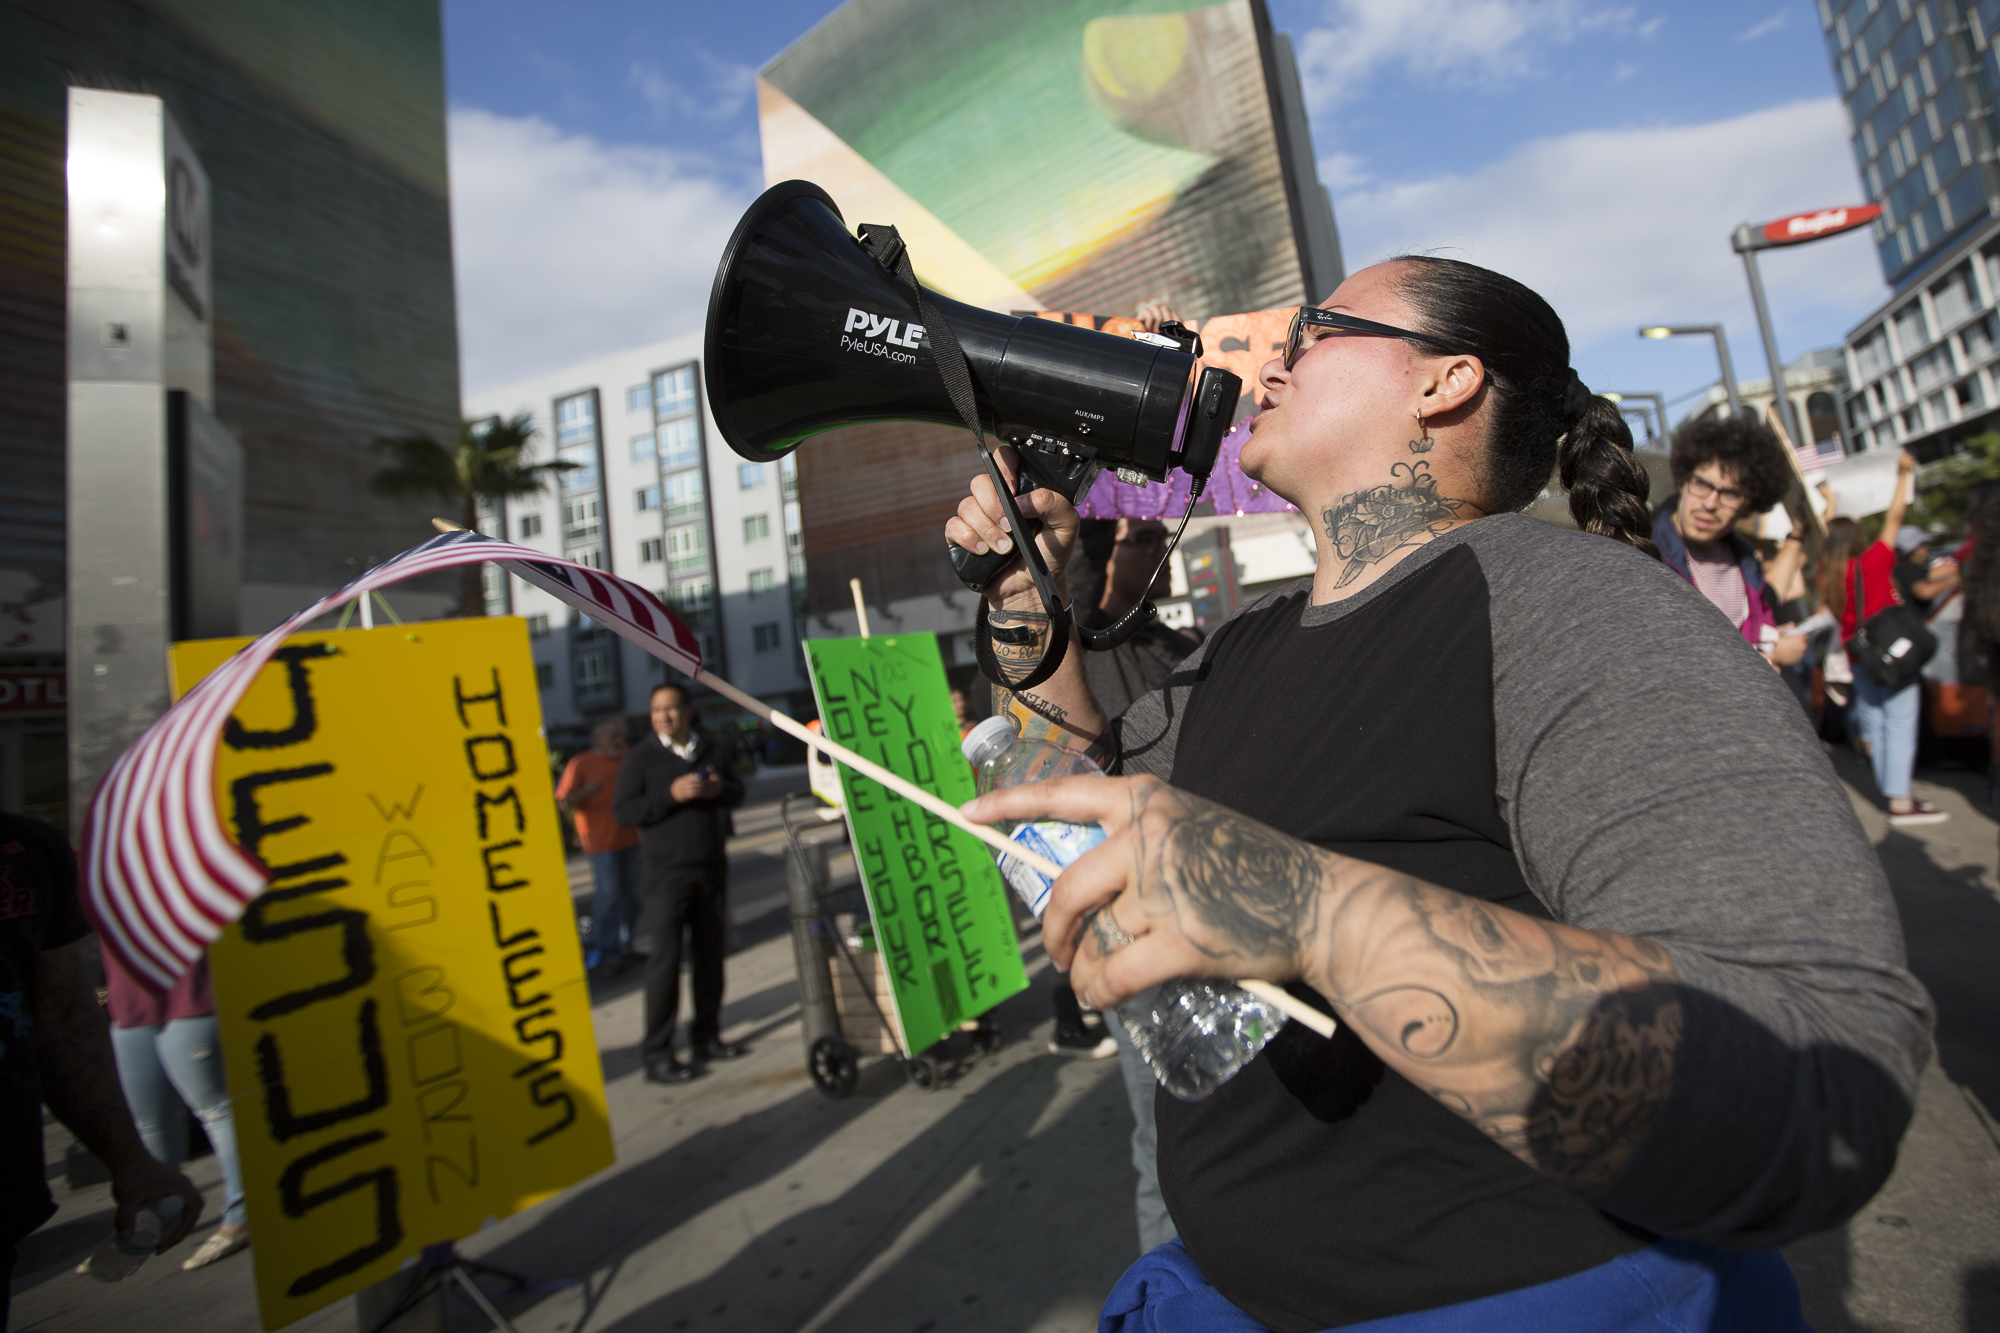  Claudia Perez, the founder and director of the organization L.A. on Cloud 9, rallys the crowd of demonstrators at the corner of Vermont Ave. and Wilshire Blvd. on May 27, 2018 in support of the homeless and the proposed emergency shelter in a nearby